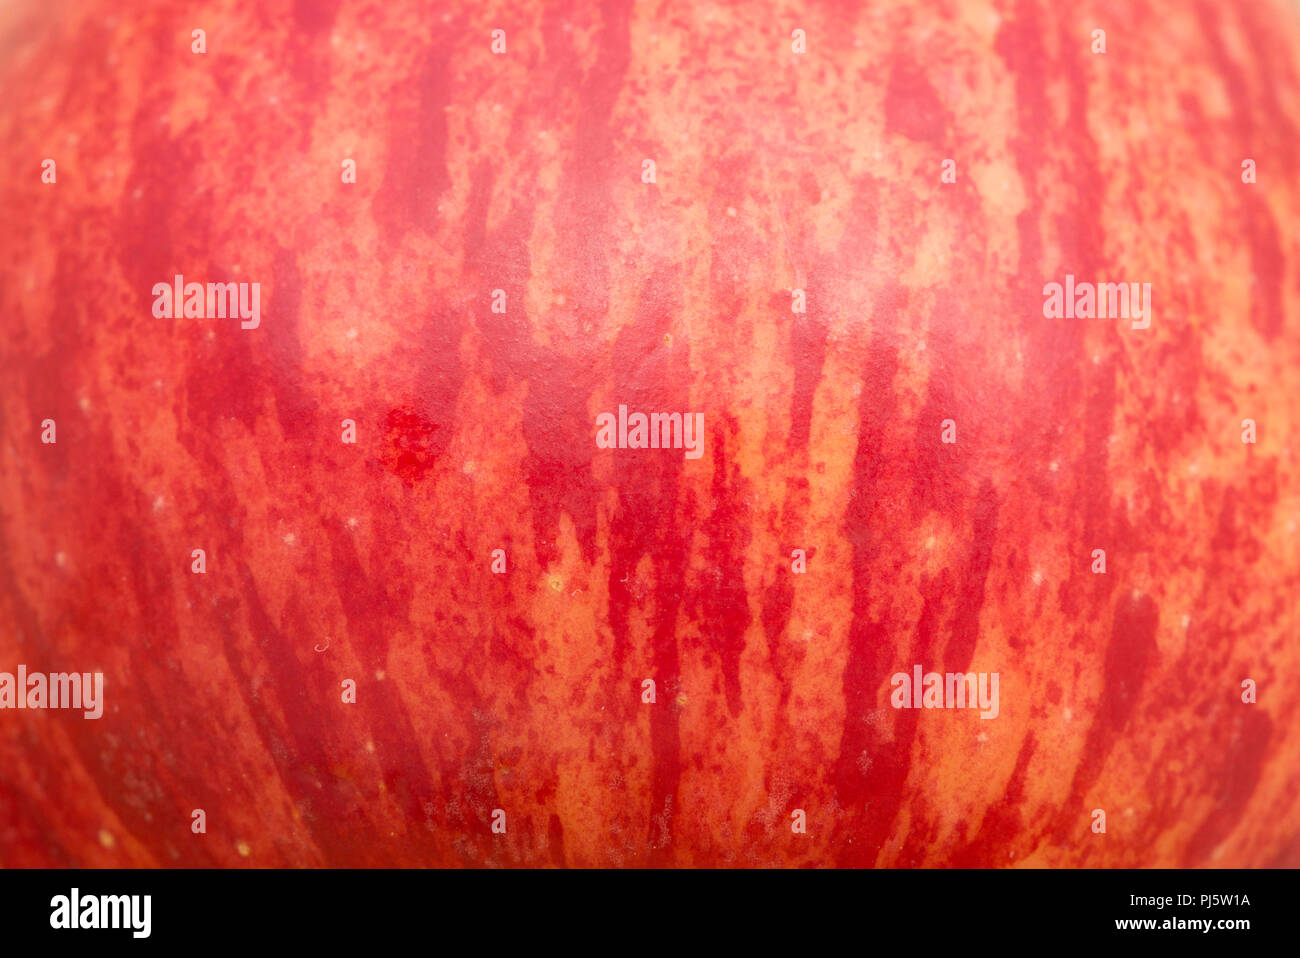 red apple background close up Stock Photo